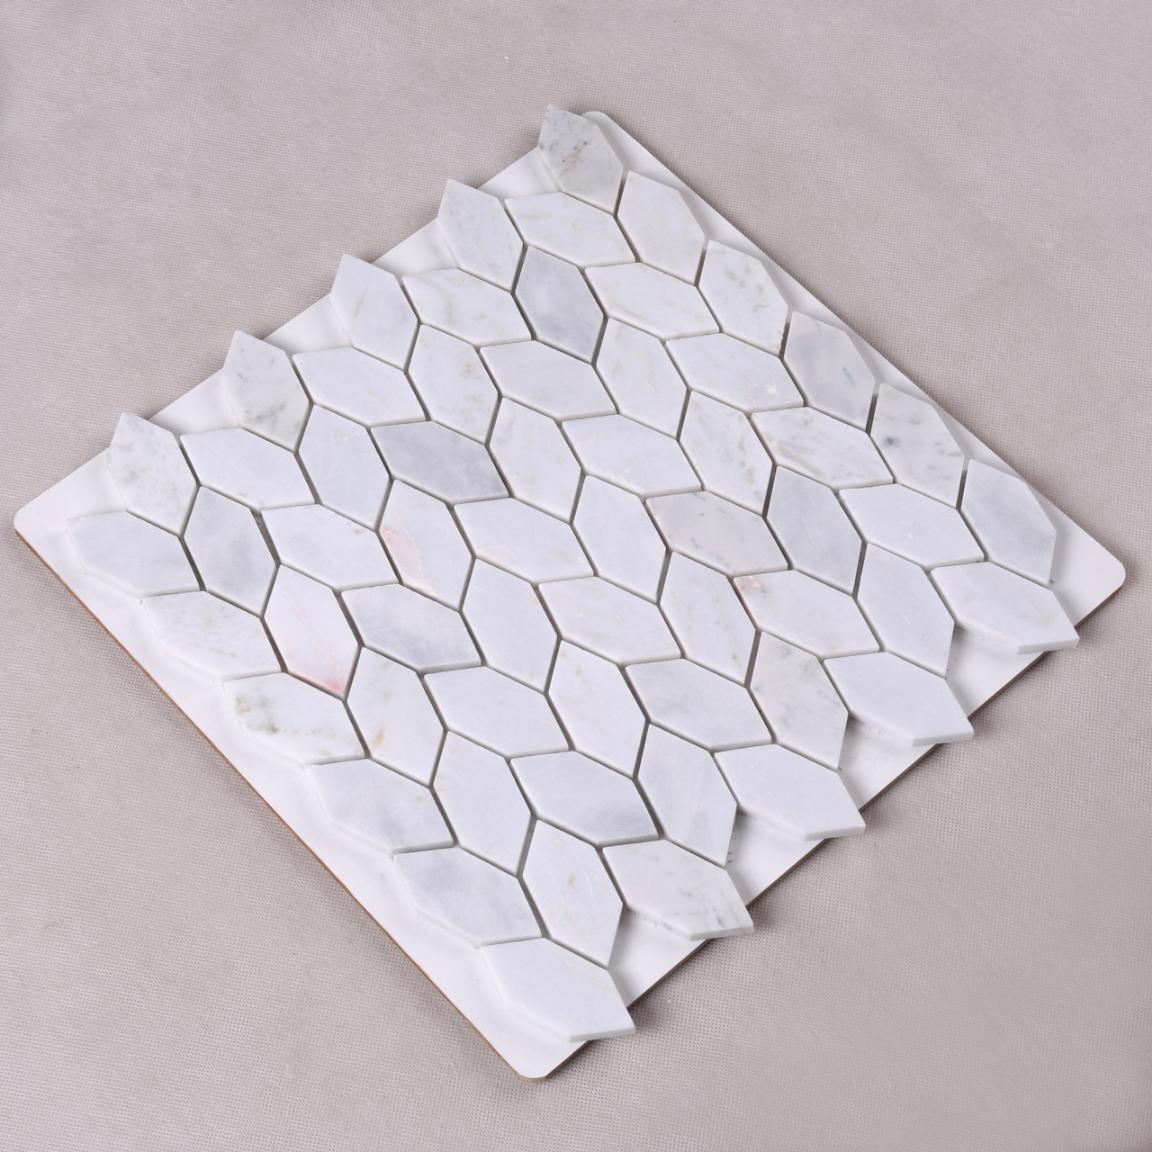 Heng Xing High-quality glass stone mosaic with good price for kitchen-3